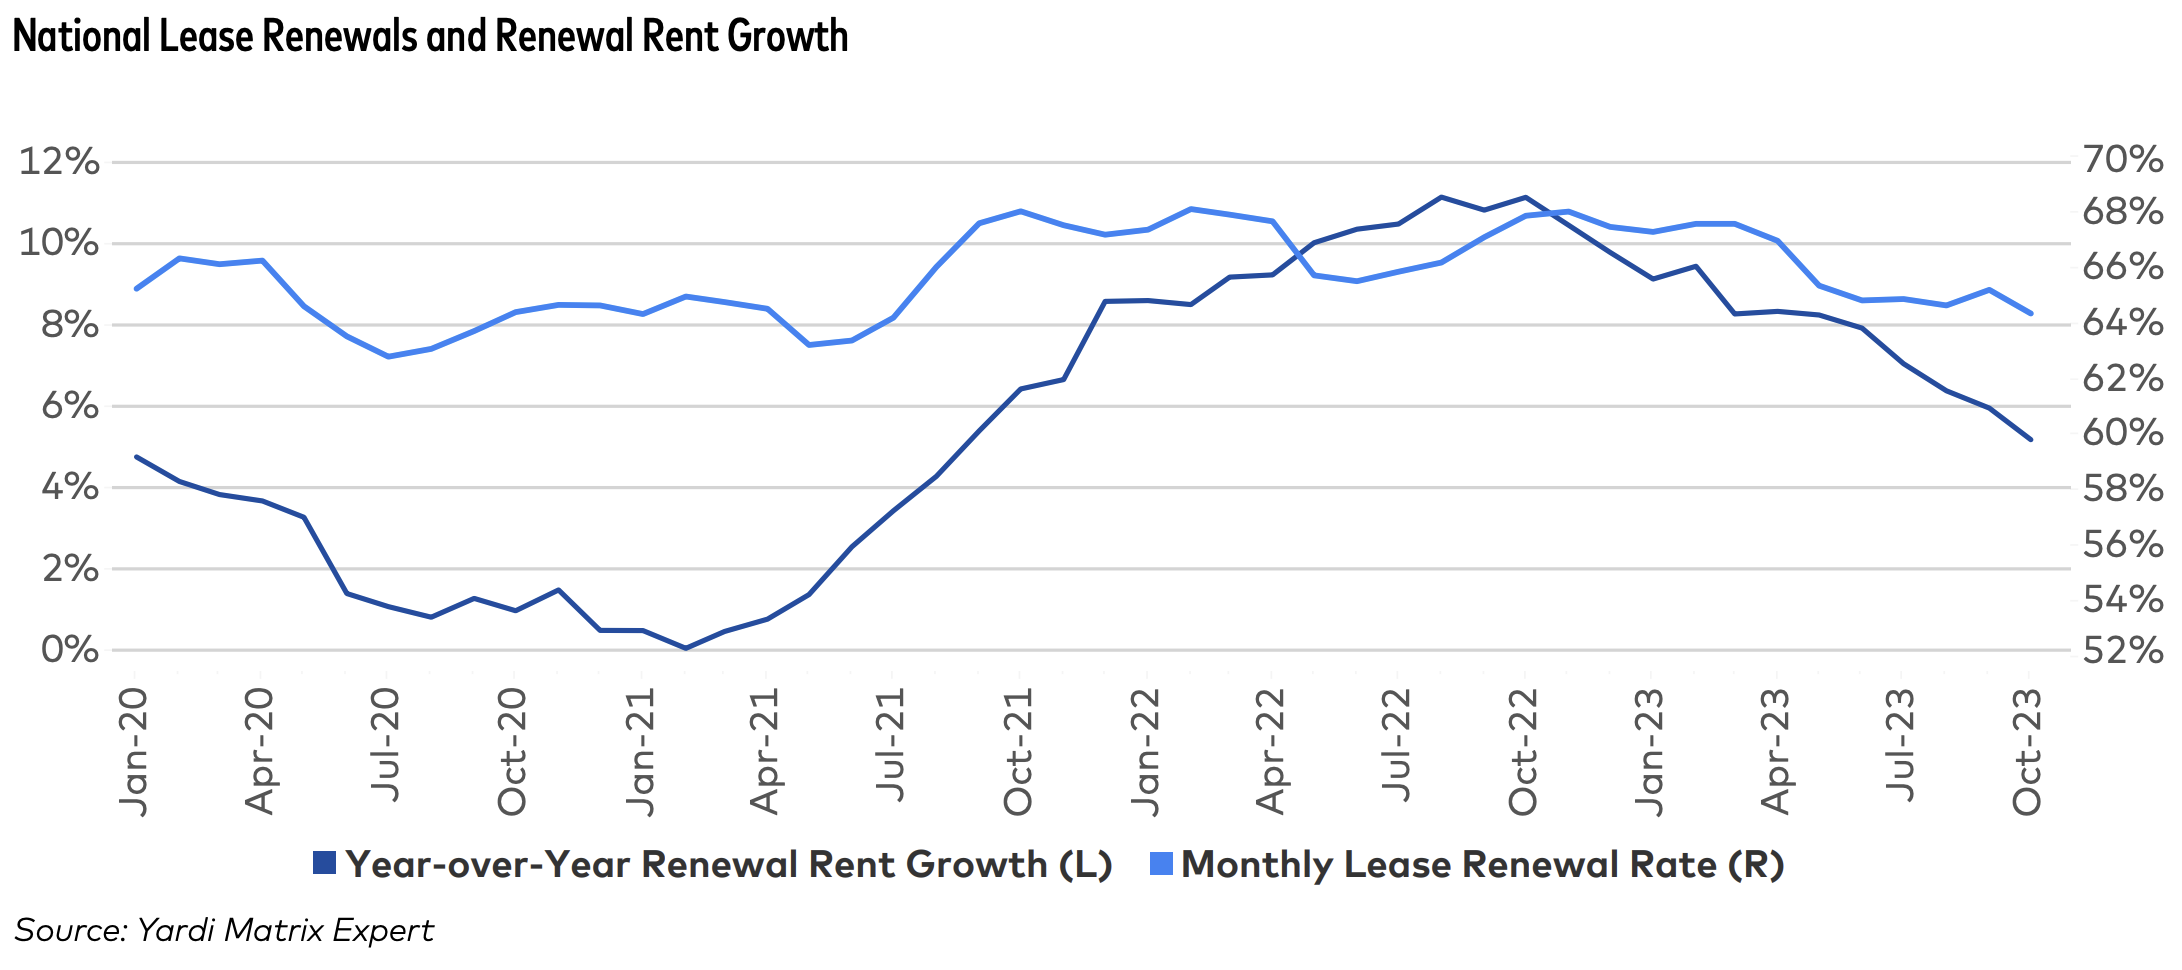 National Lease Renewals and Renewal Rent Growth